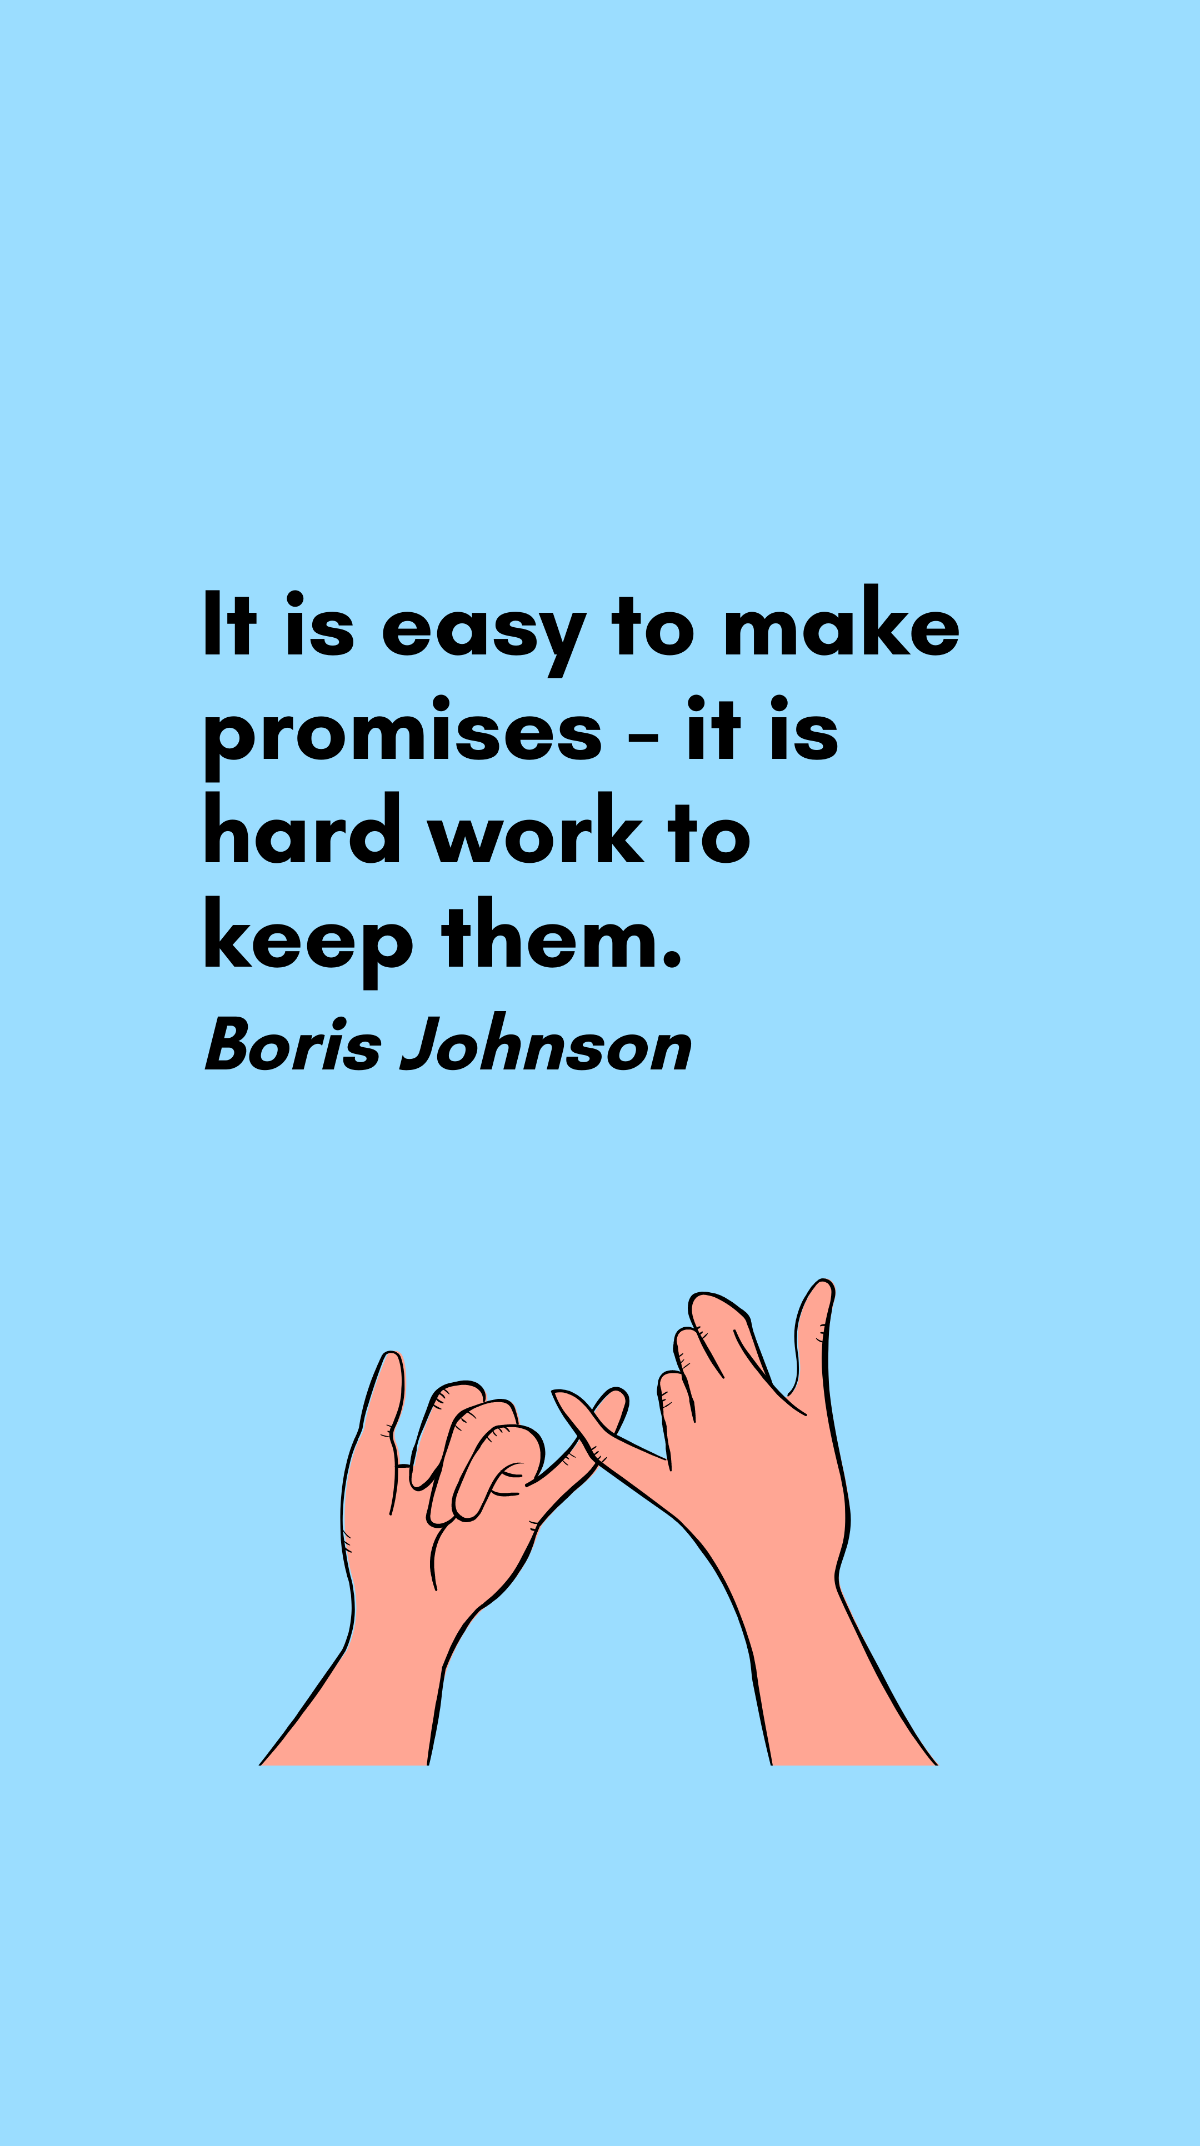 Boris Johnson - It is easy to make promises - it is hard work to keep them. Template